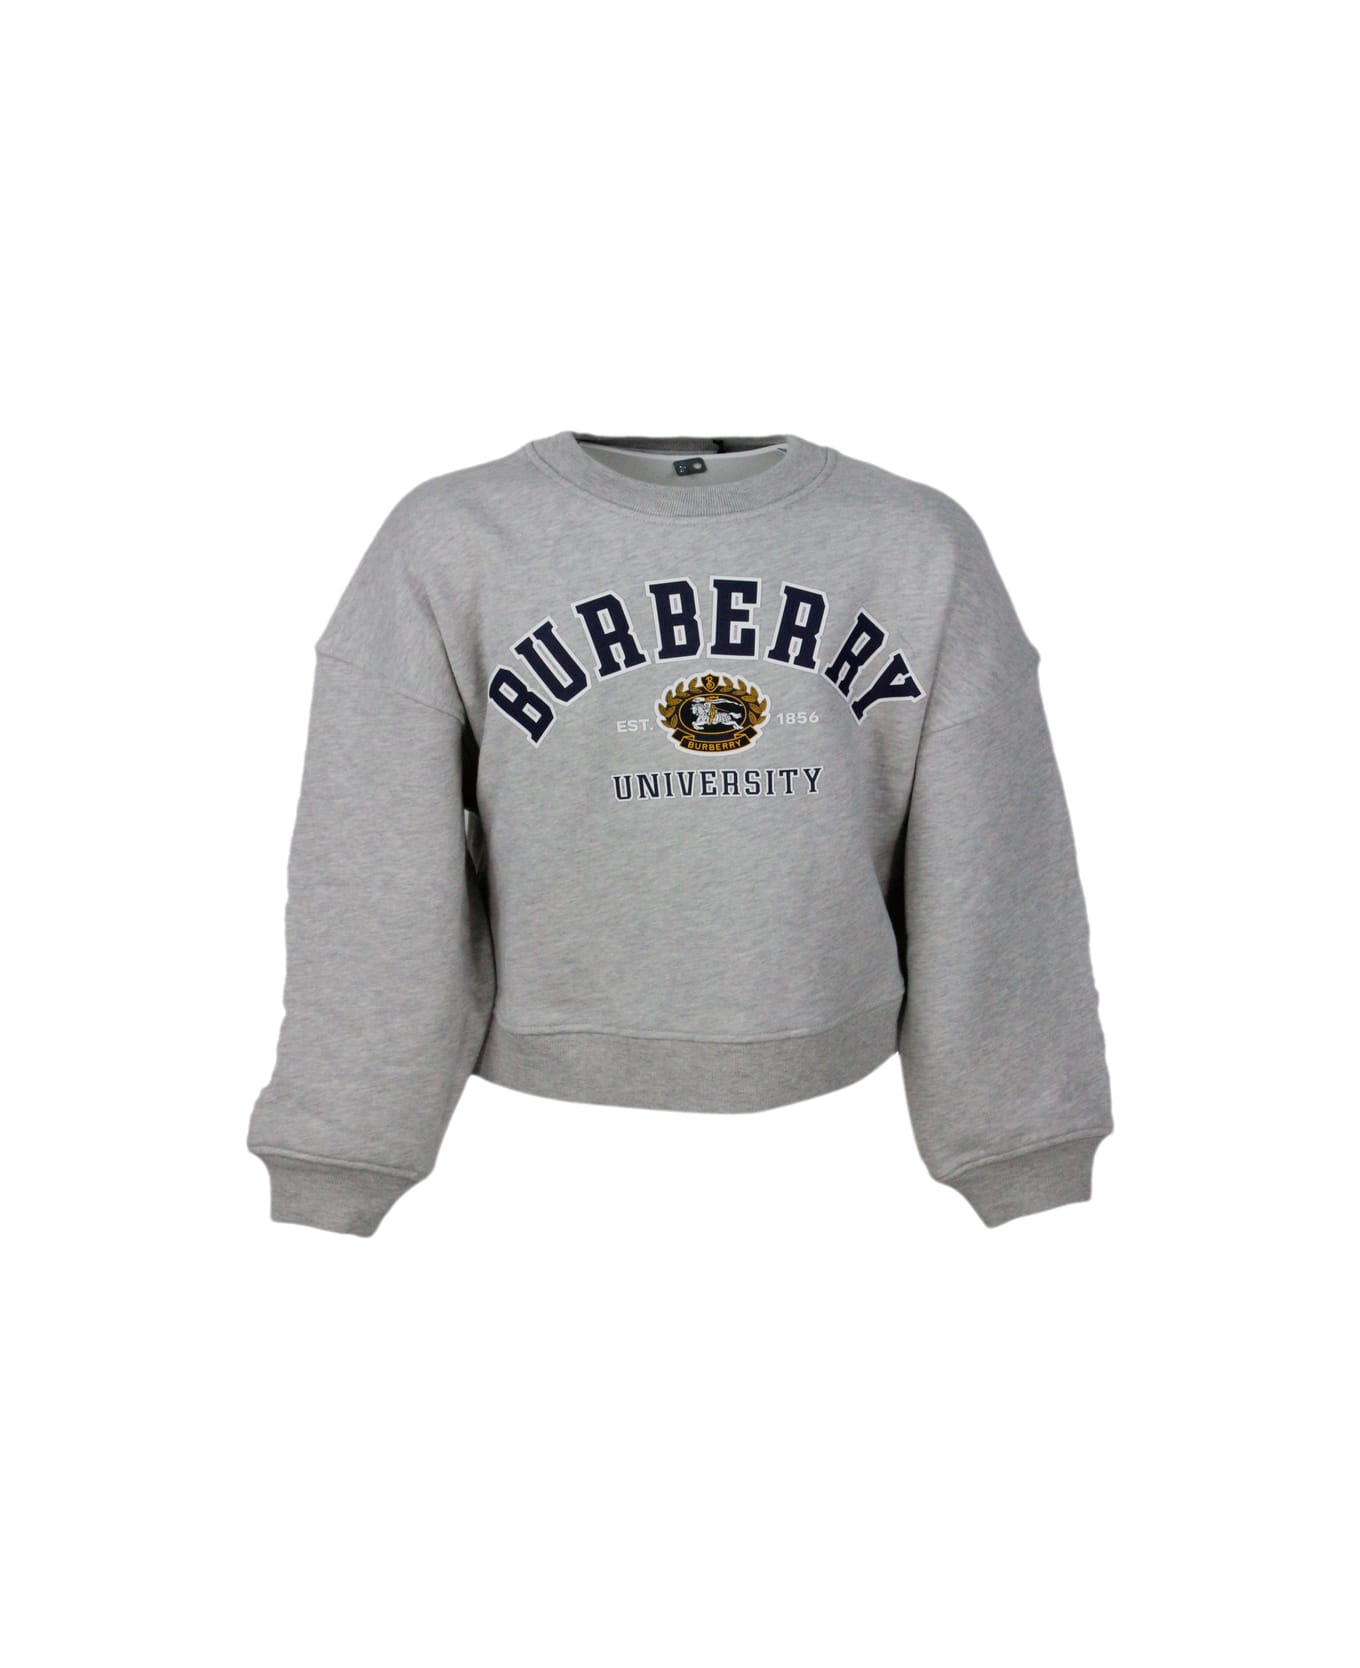 Burberry Crewneck Sweatshirt In Cotton Jersey With Logo Print And University Writing On The Front - Grey ニットウェア＆スウェットシャツ